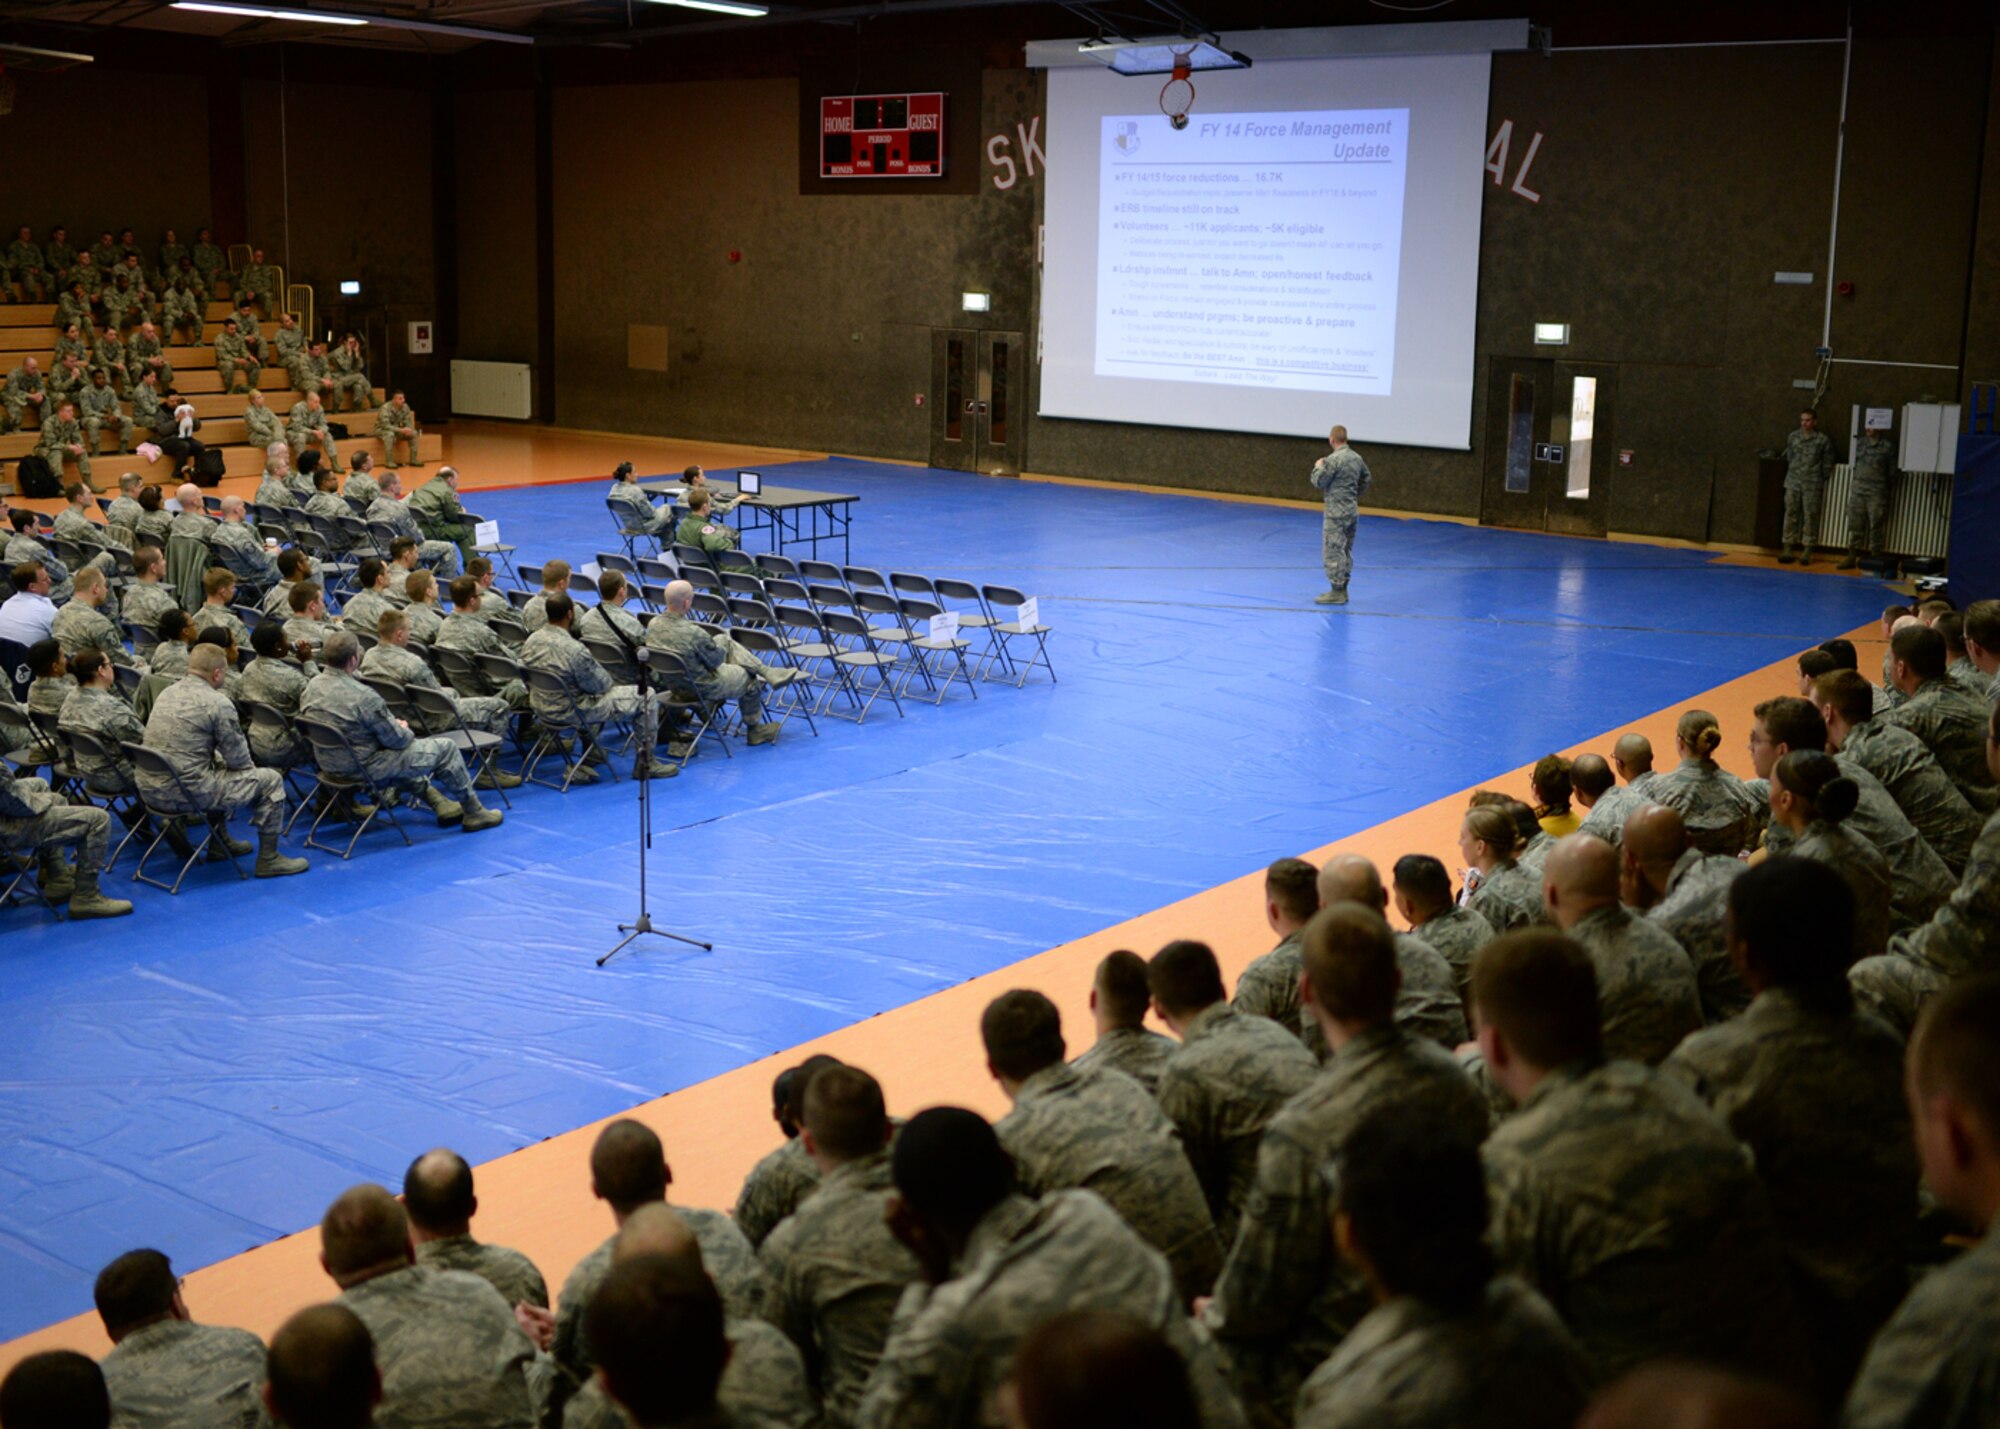 U.S. Air Force Chief Master Sgt. Matt Grengs, 52nd Fighter Wing command chief from Longmont, Colo., shares the most current information about the Air Force's force management program during a mass briefing in the Skelton Memorial Fitness Center at Spangdahlem Air Base, Germany, March 26, 2014. More than 300 enlisted Airmen attended the commander’s call to understand the base leadership's vision for the future of Spangdahlem. (U.S. Air Force photo by Staff Sgt. Daryl Knee/Released)